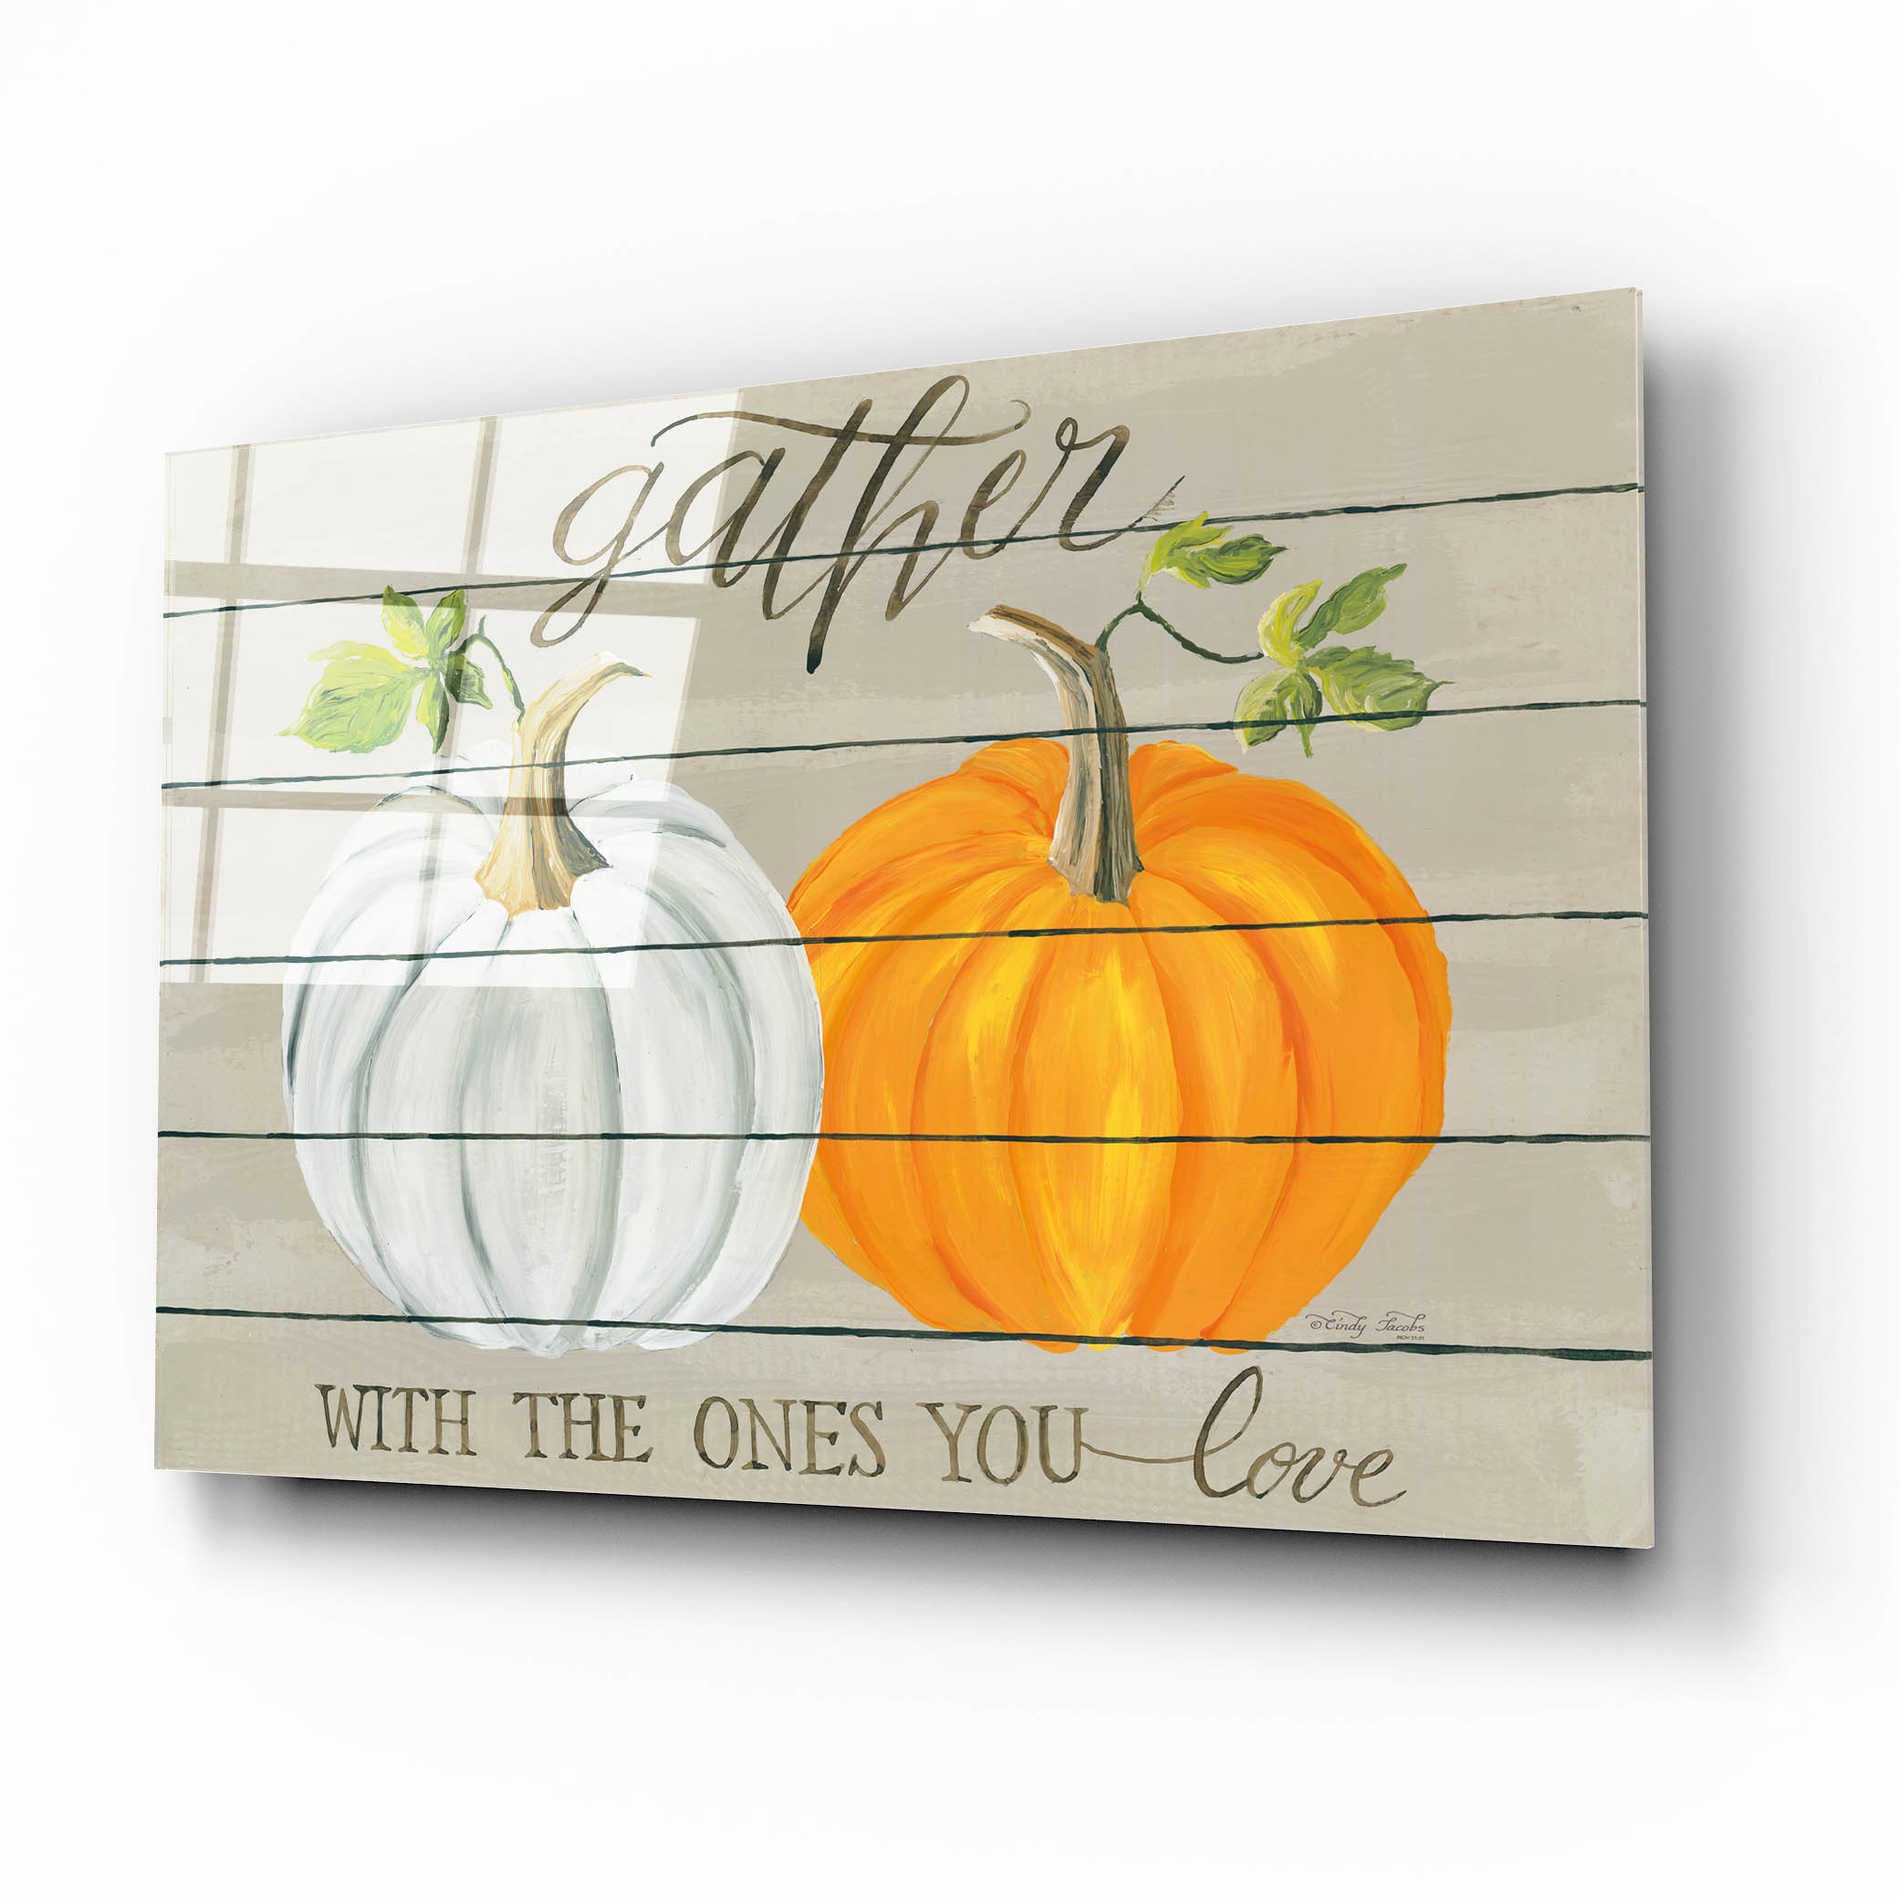 Epic Art 'Gather With The Ones You Love Pumpkins' by Cindy Jacobs, Acrylic Glass Wall Art,16x12